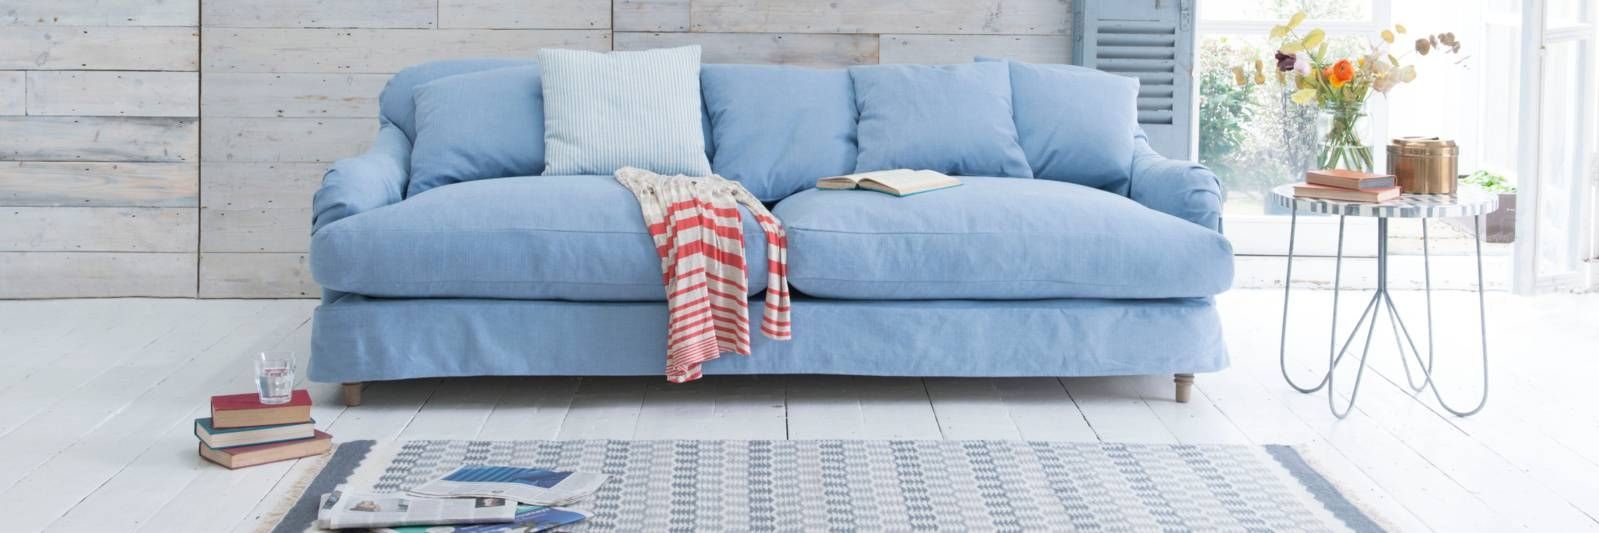 Loose Cover Sofas | Sofas With Removable Covers | Loaf Regarding Sofa With Removable Cover (View 1 of 30)